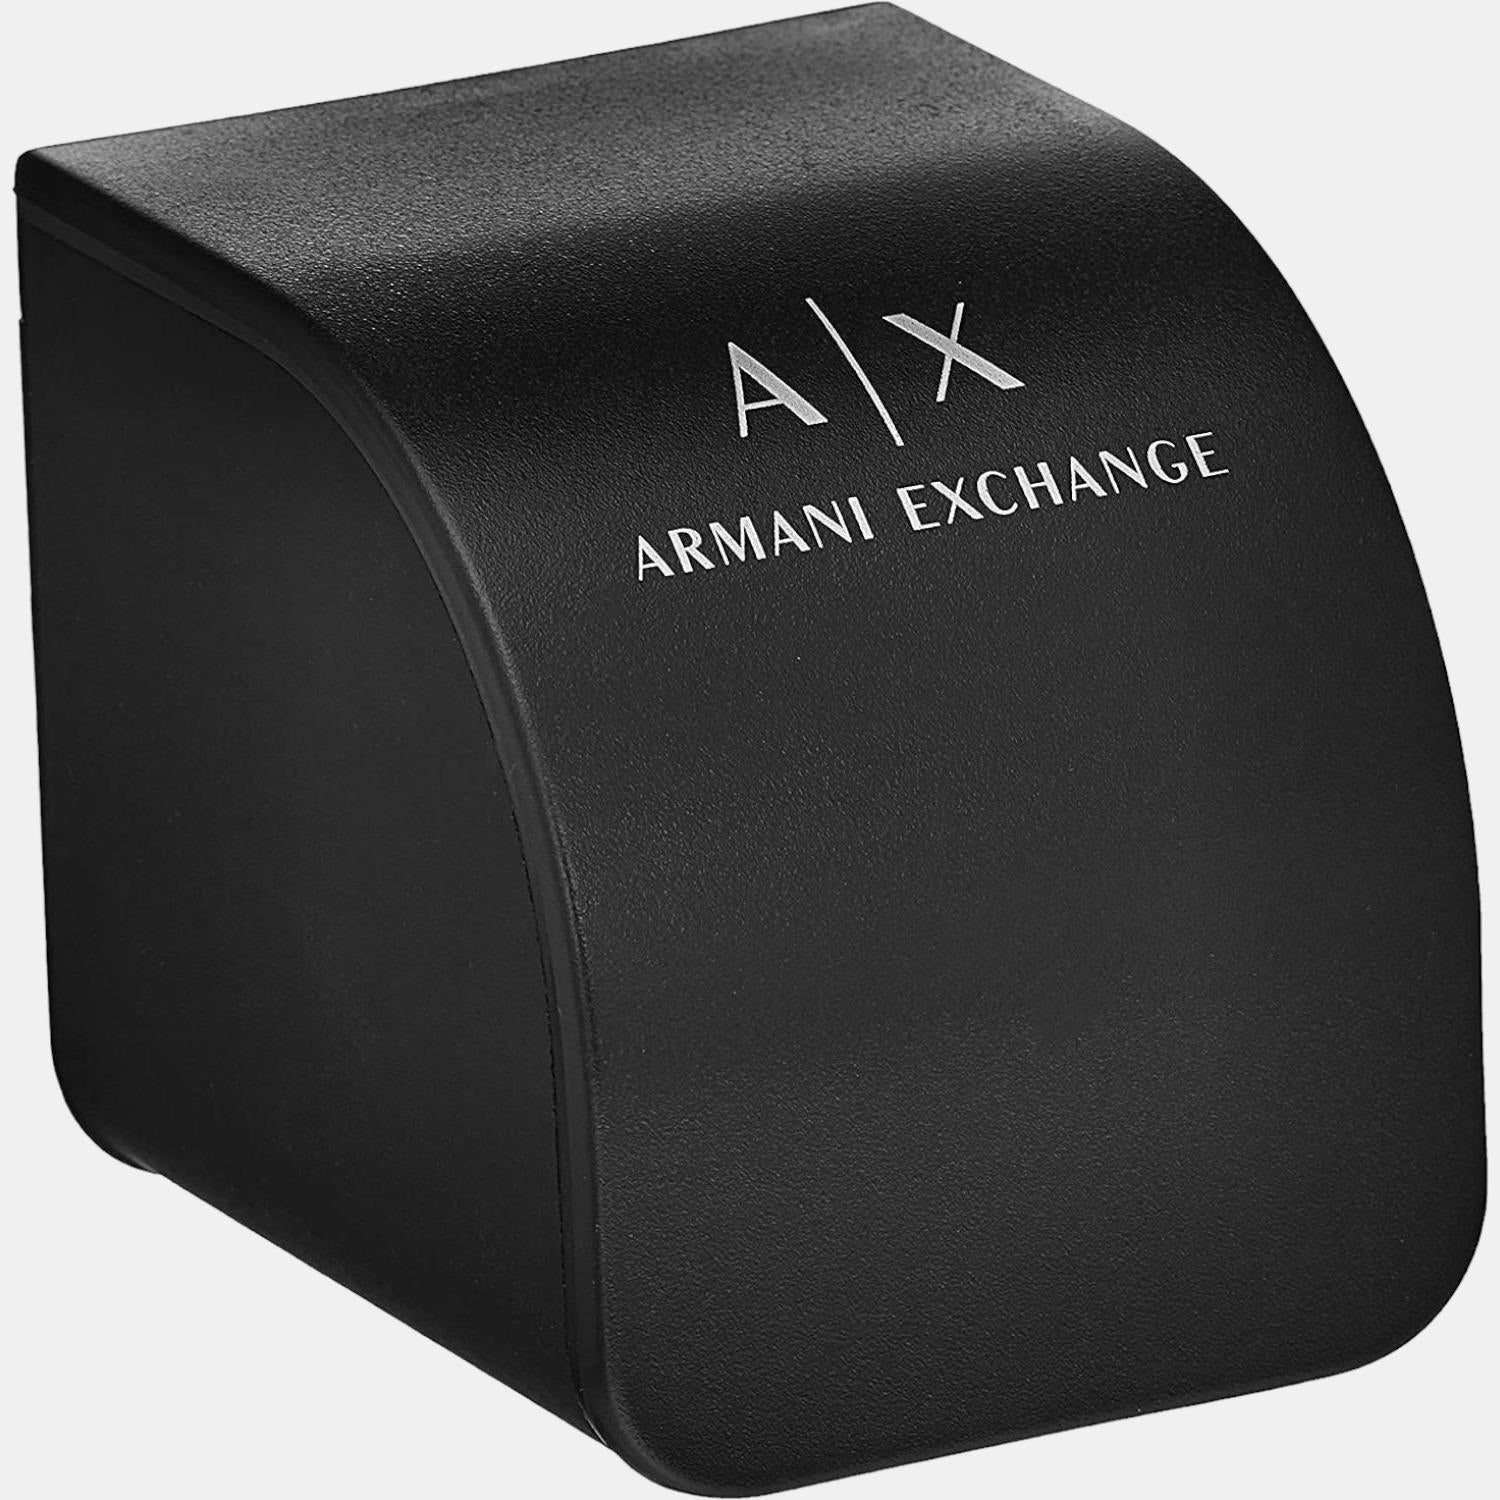 Armani Exchange Male Black Analog Stainless Steel Watch